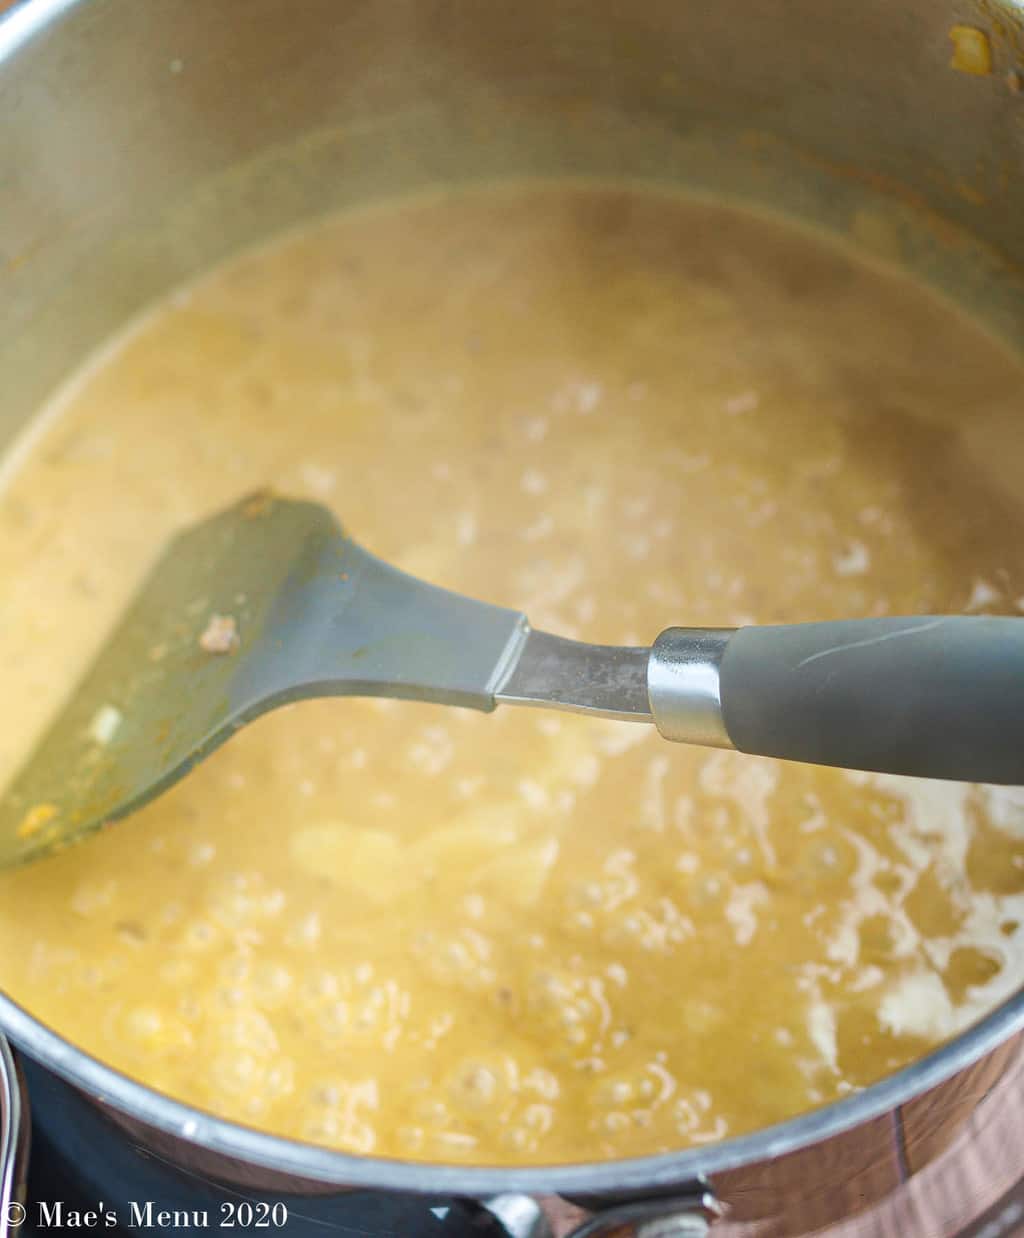 The simmering peanut butter curry sauce